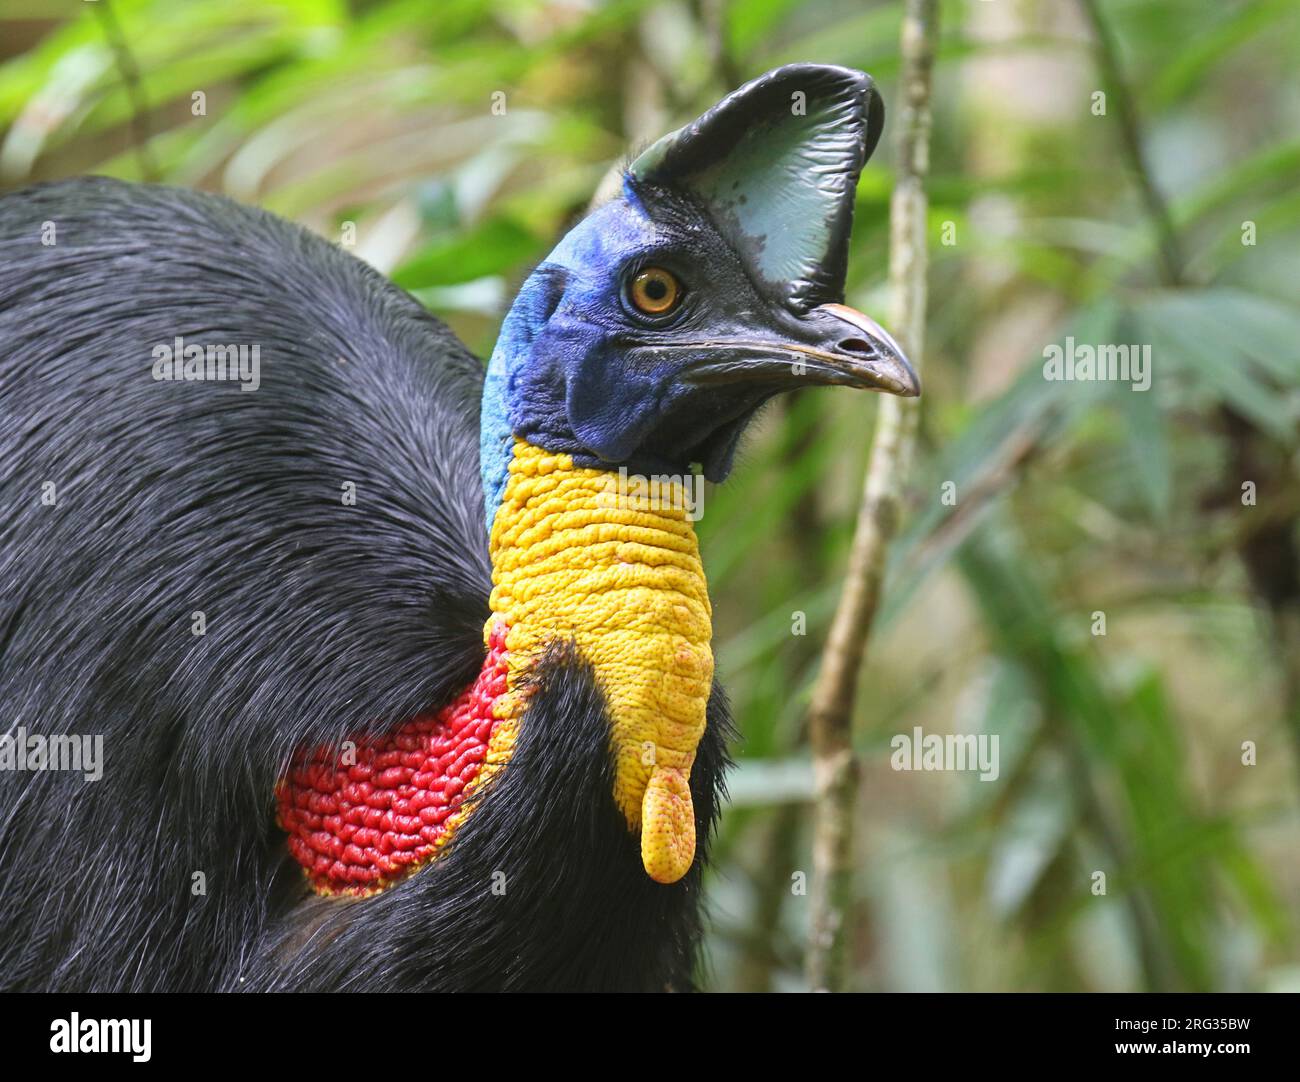 Adult Northern Cassowary (Casuarius unappendiculatus) in Papua New Guinea. Also known as the one-wattled, single-wattled or golden-necked cassowary. Stock Photo